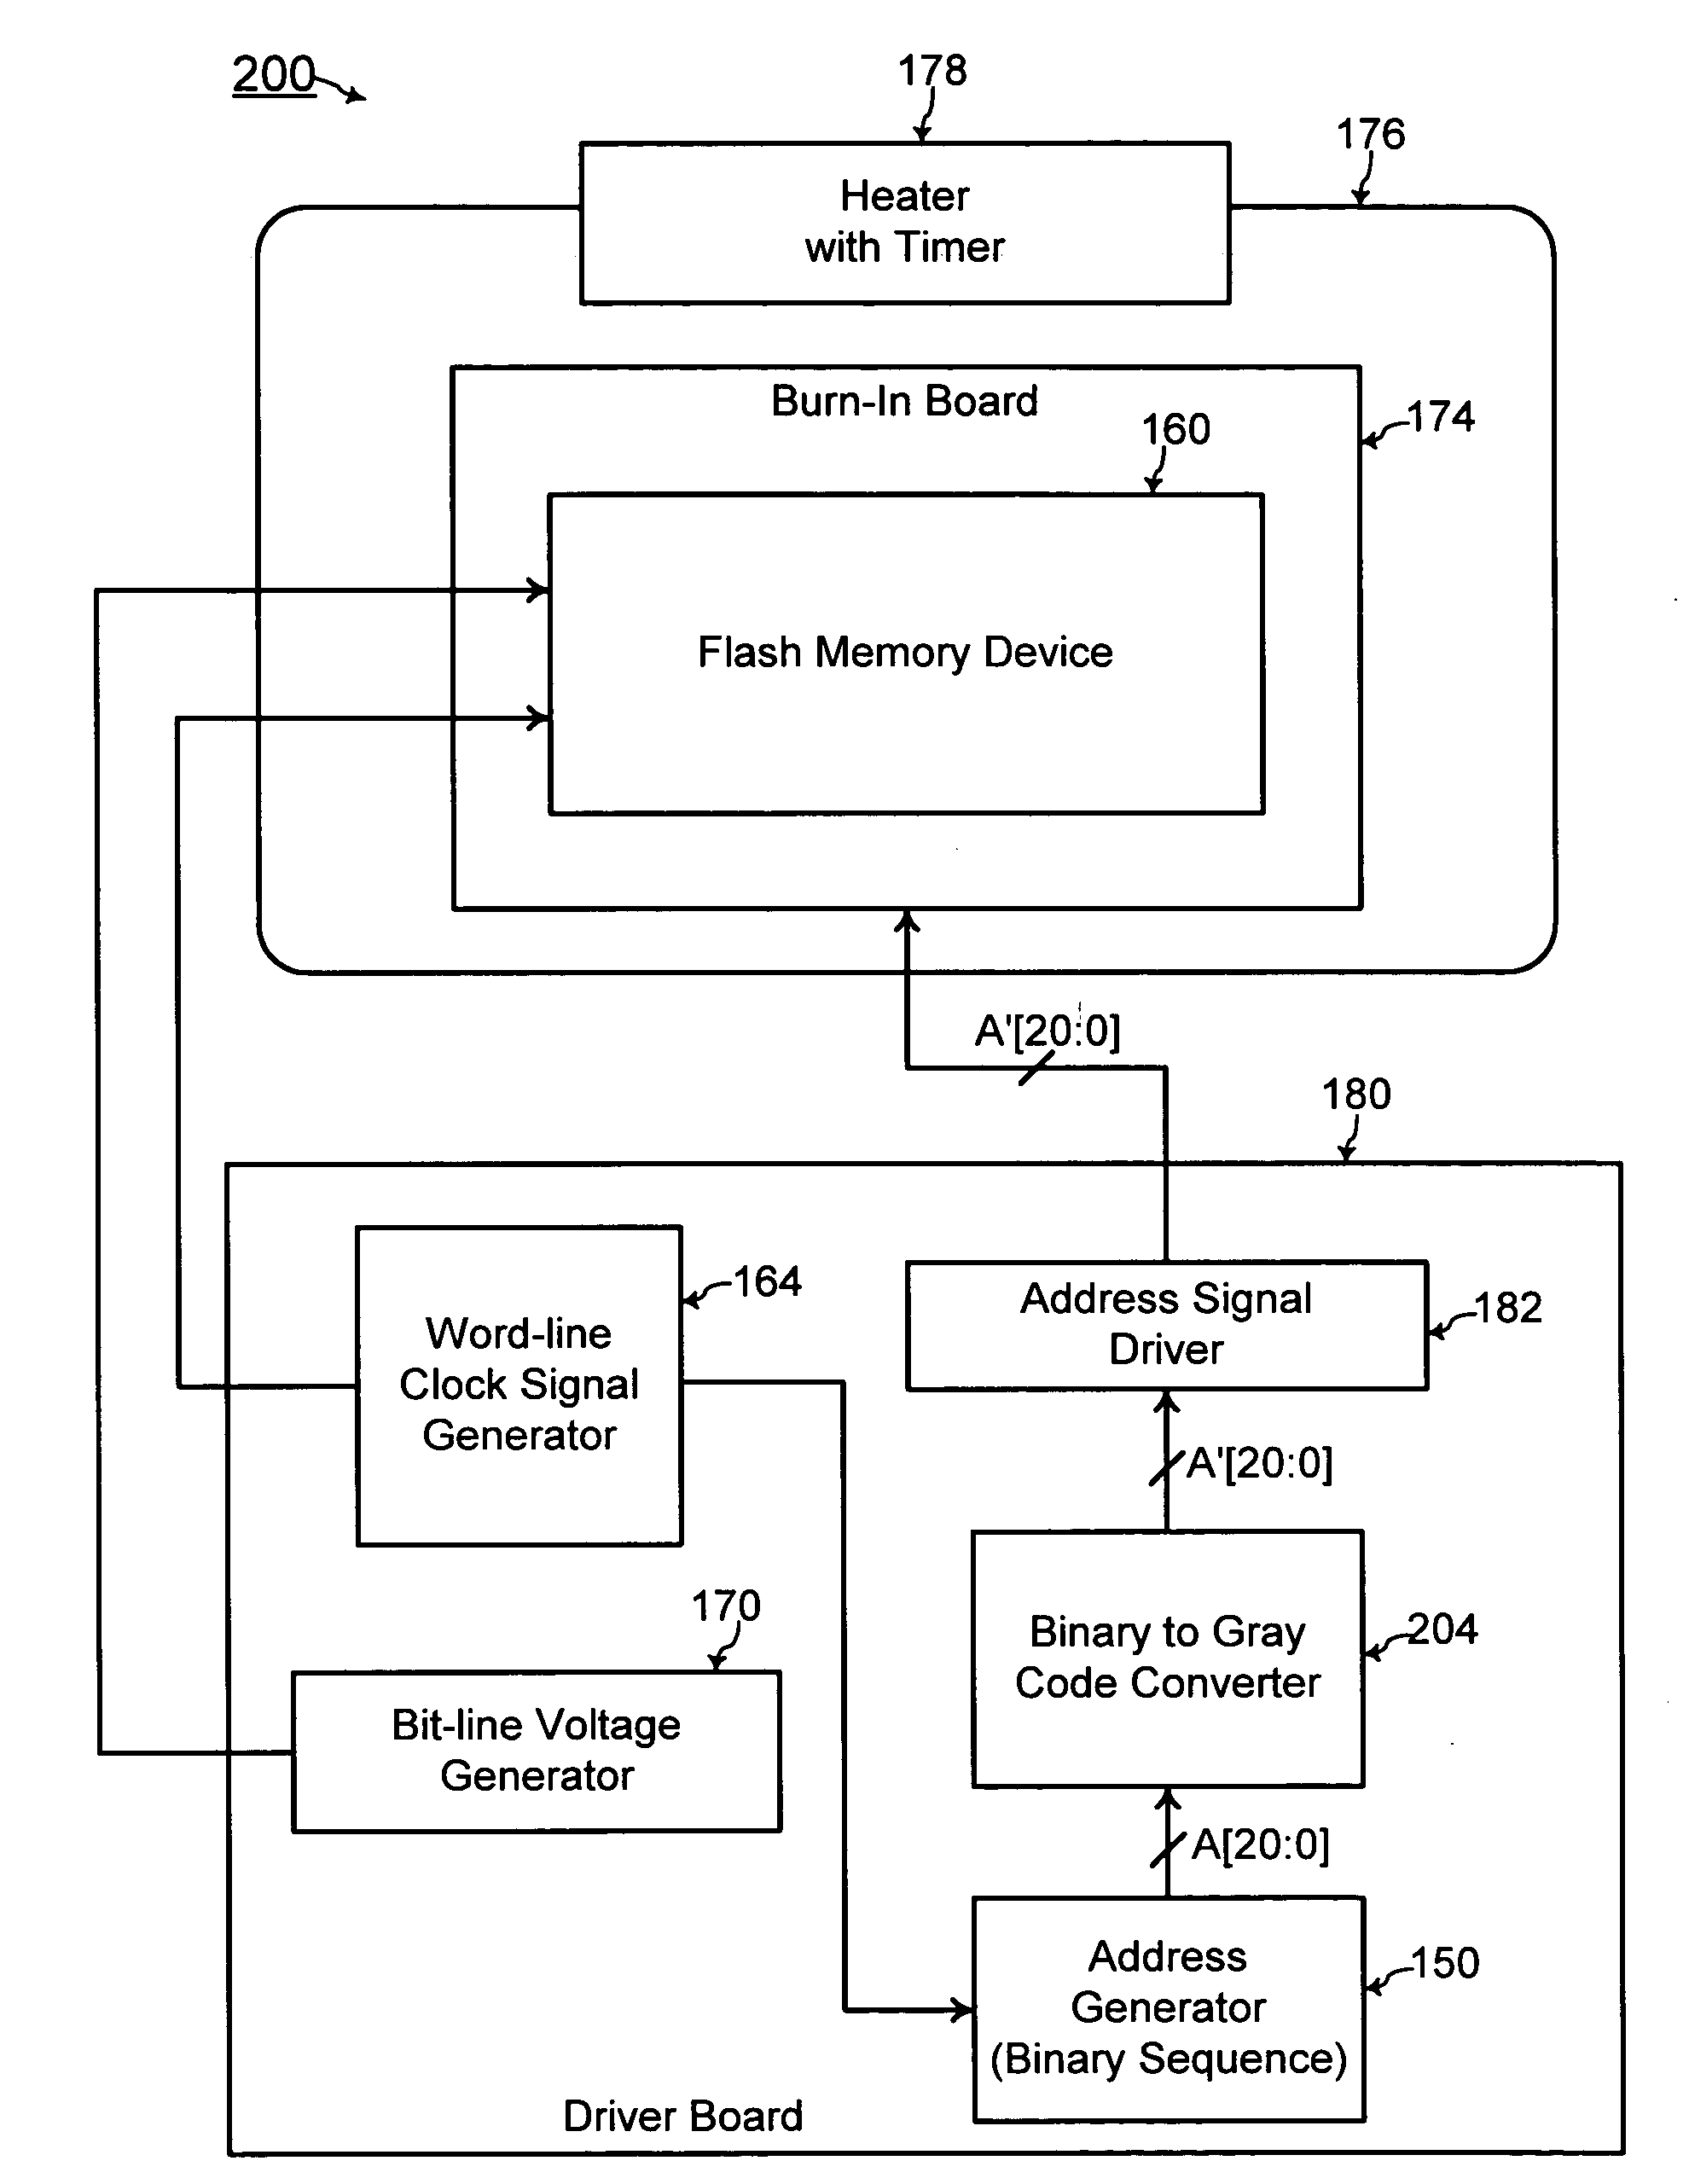 Testing for operating life of a memory device with address cycling using a gray code sequence